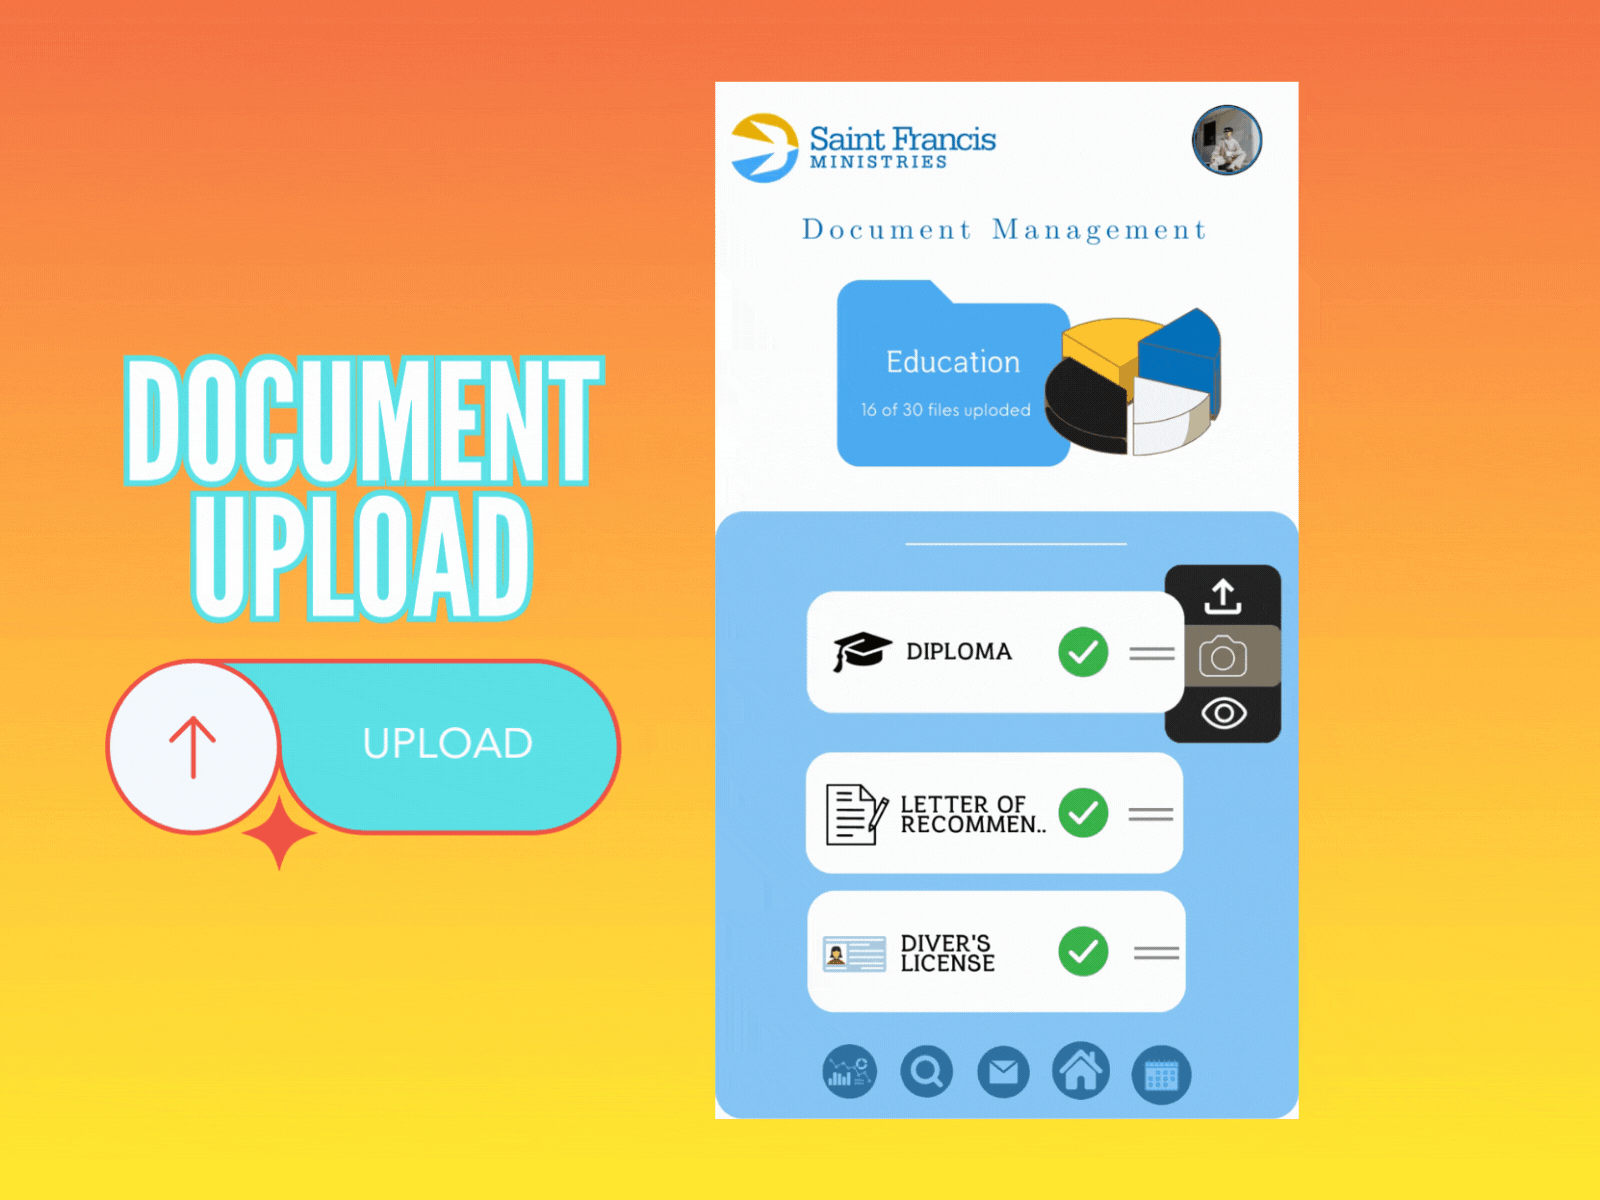 Document Upload and Review